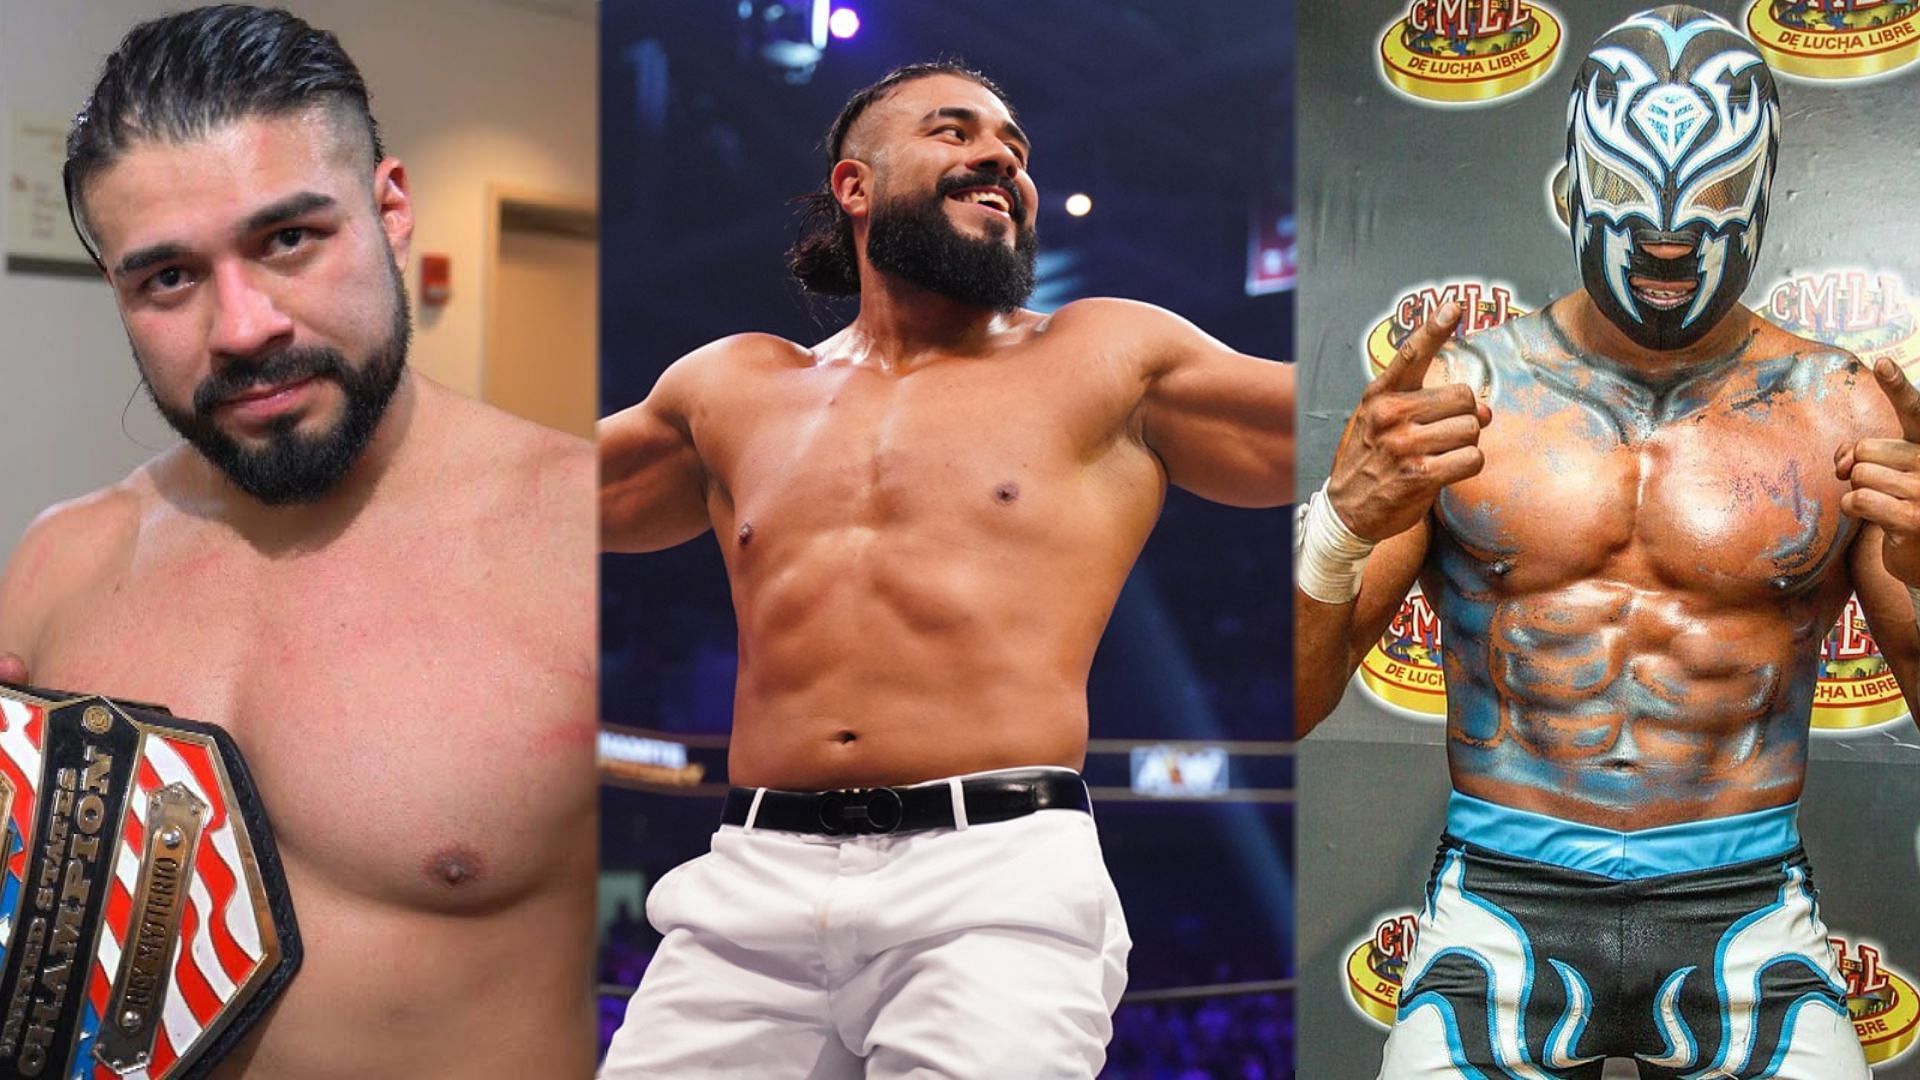 Andrade has had quite a career in wrestling so far.